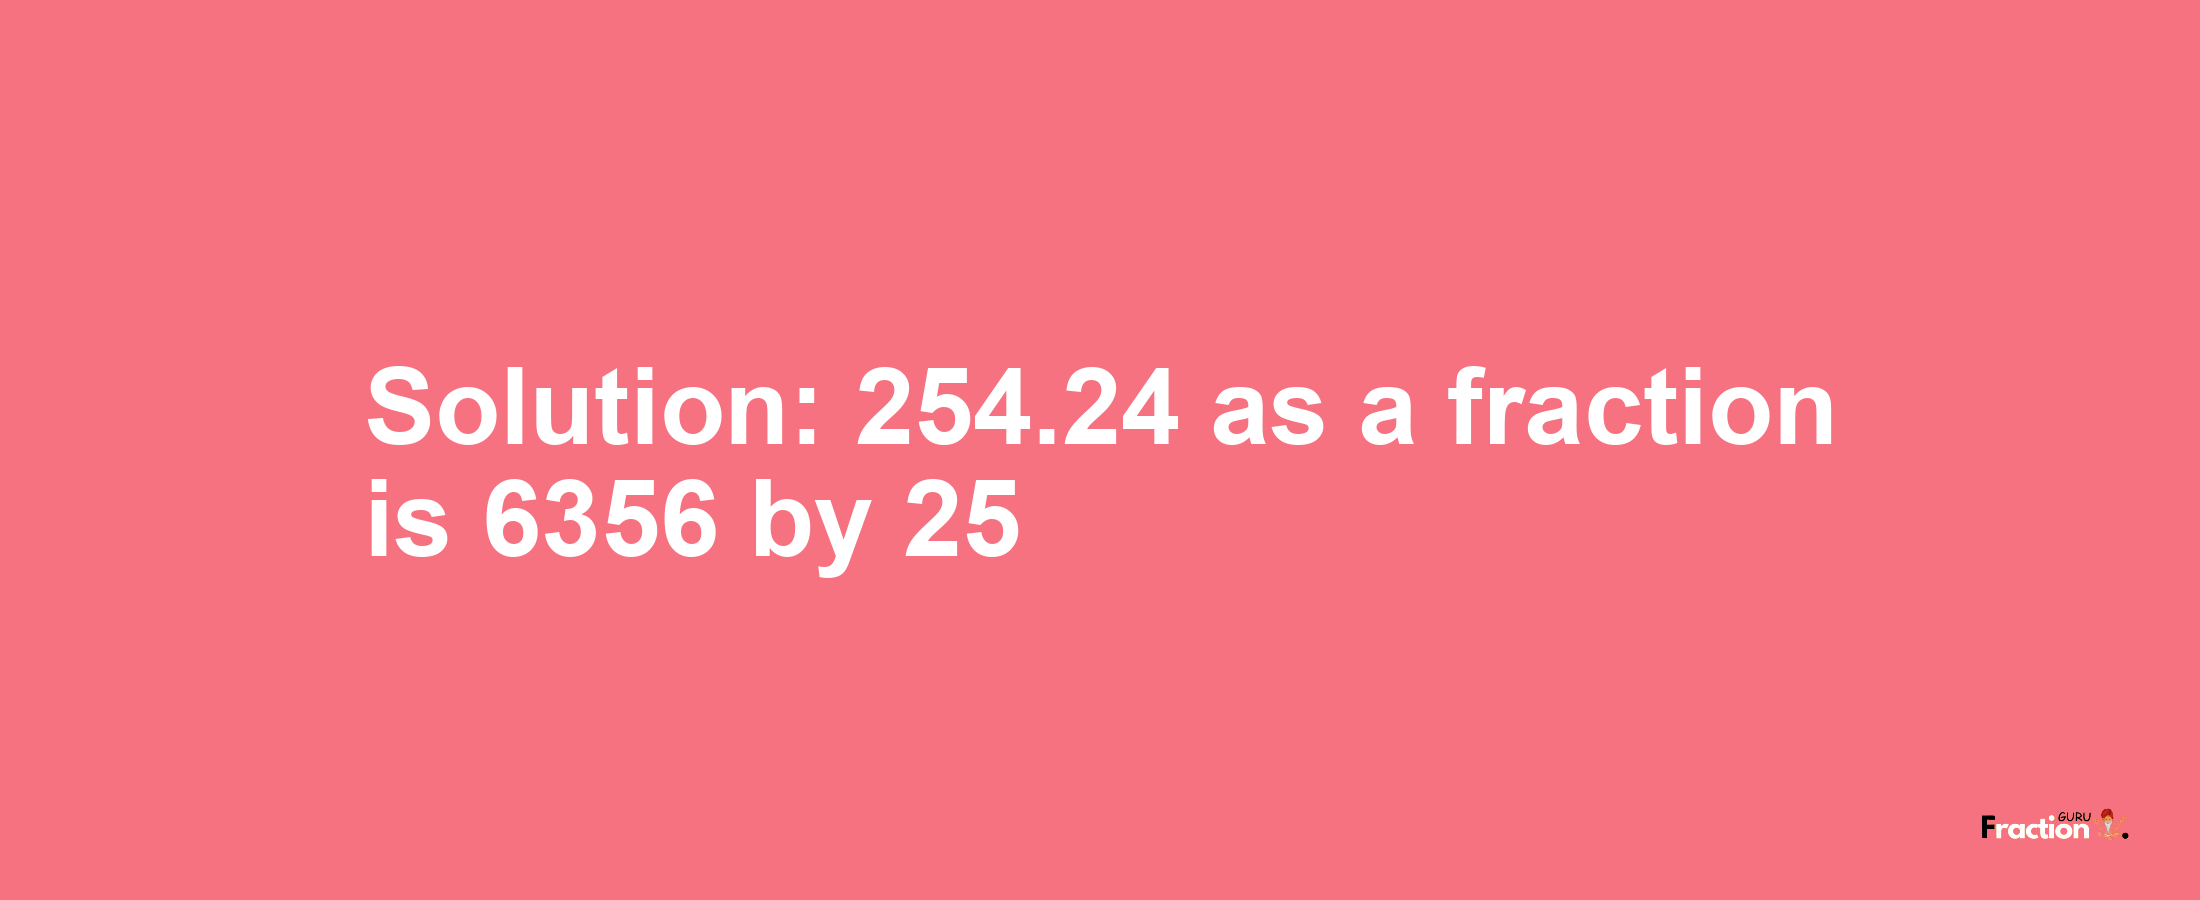 Solution:254.24 as a fraction is 6356/25